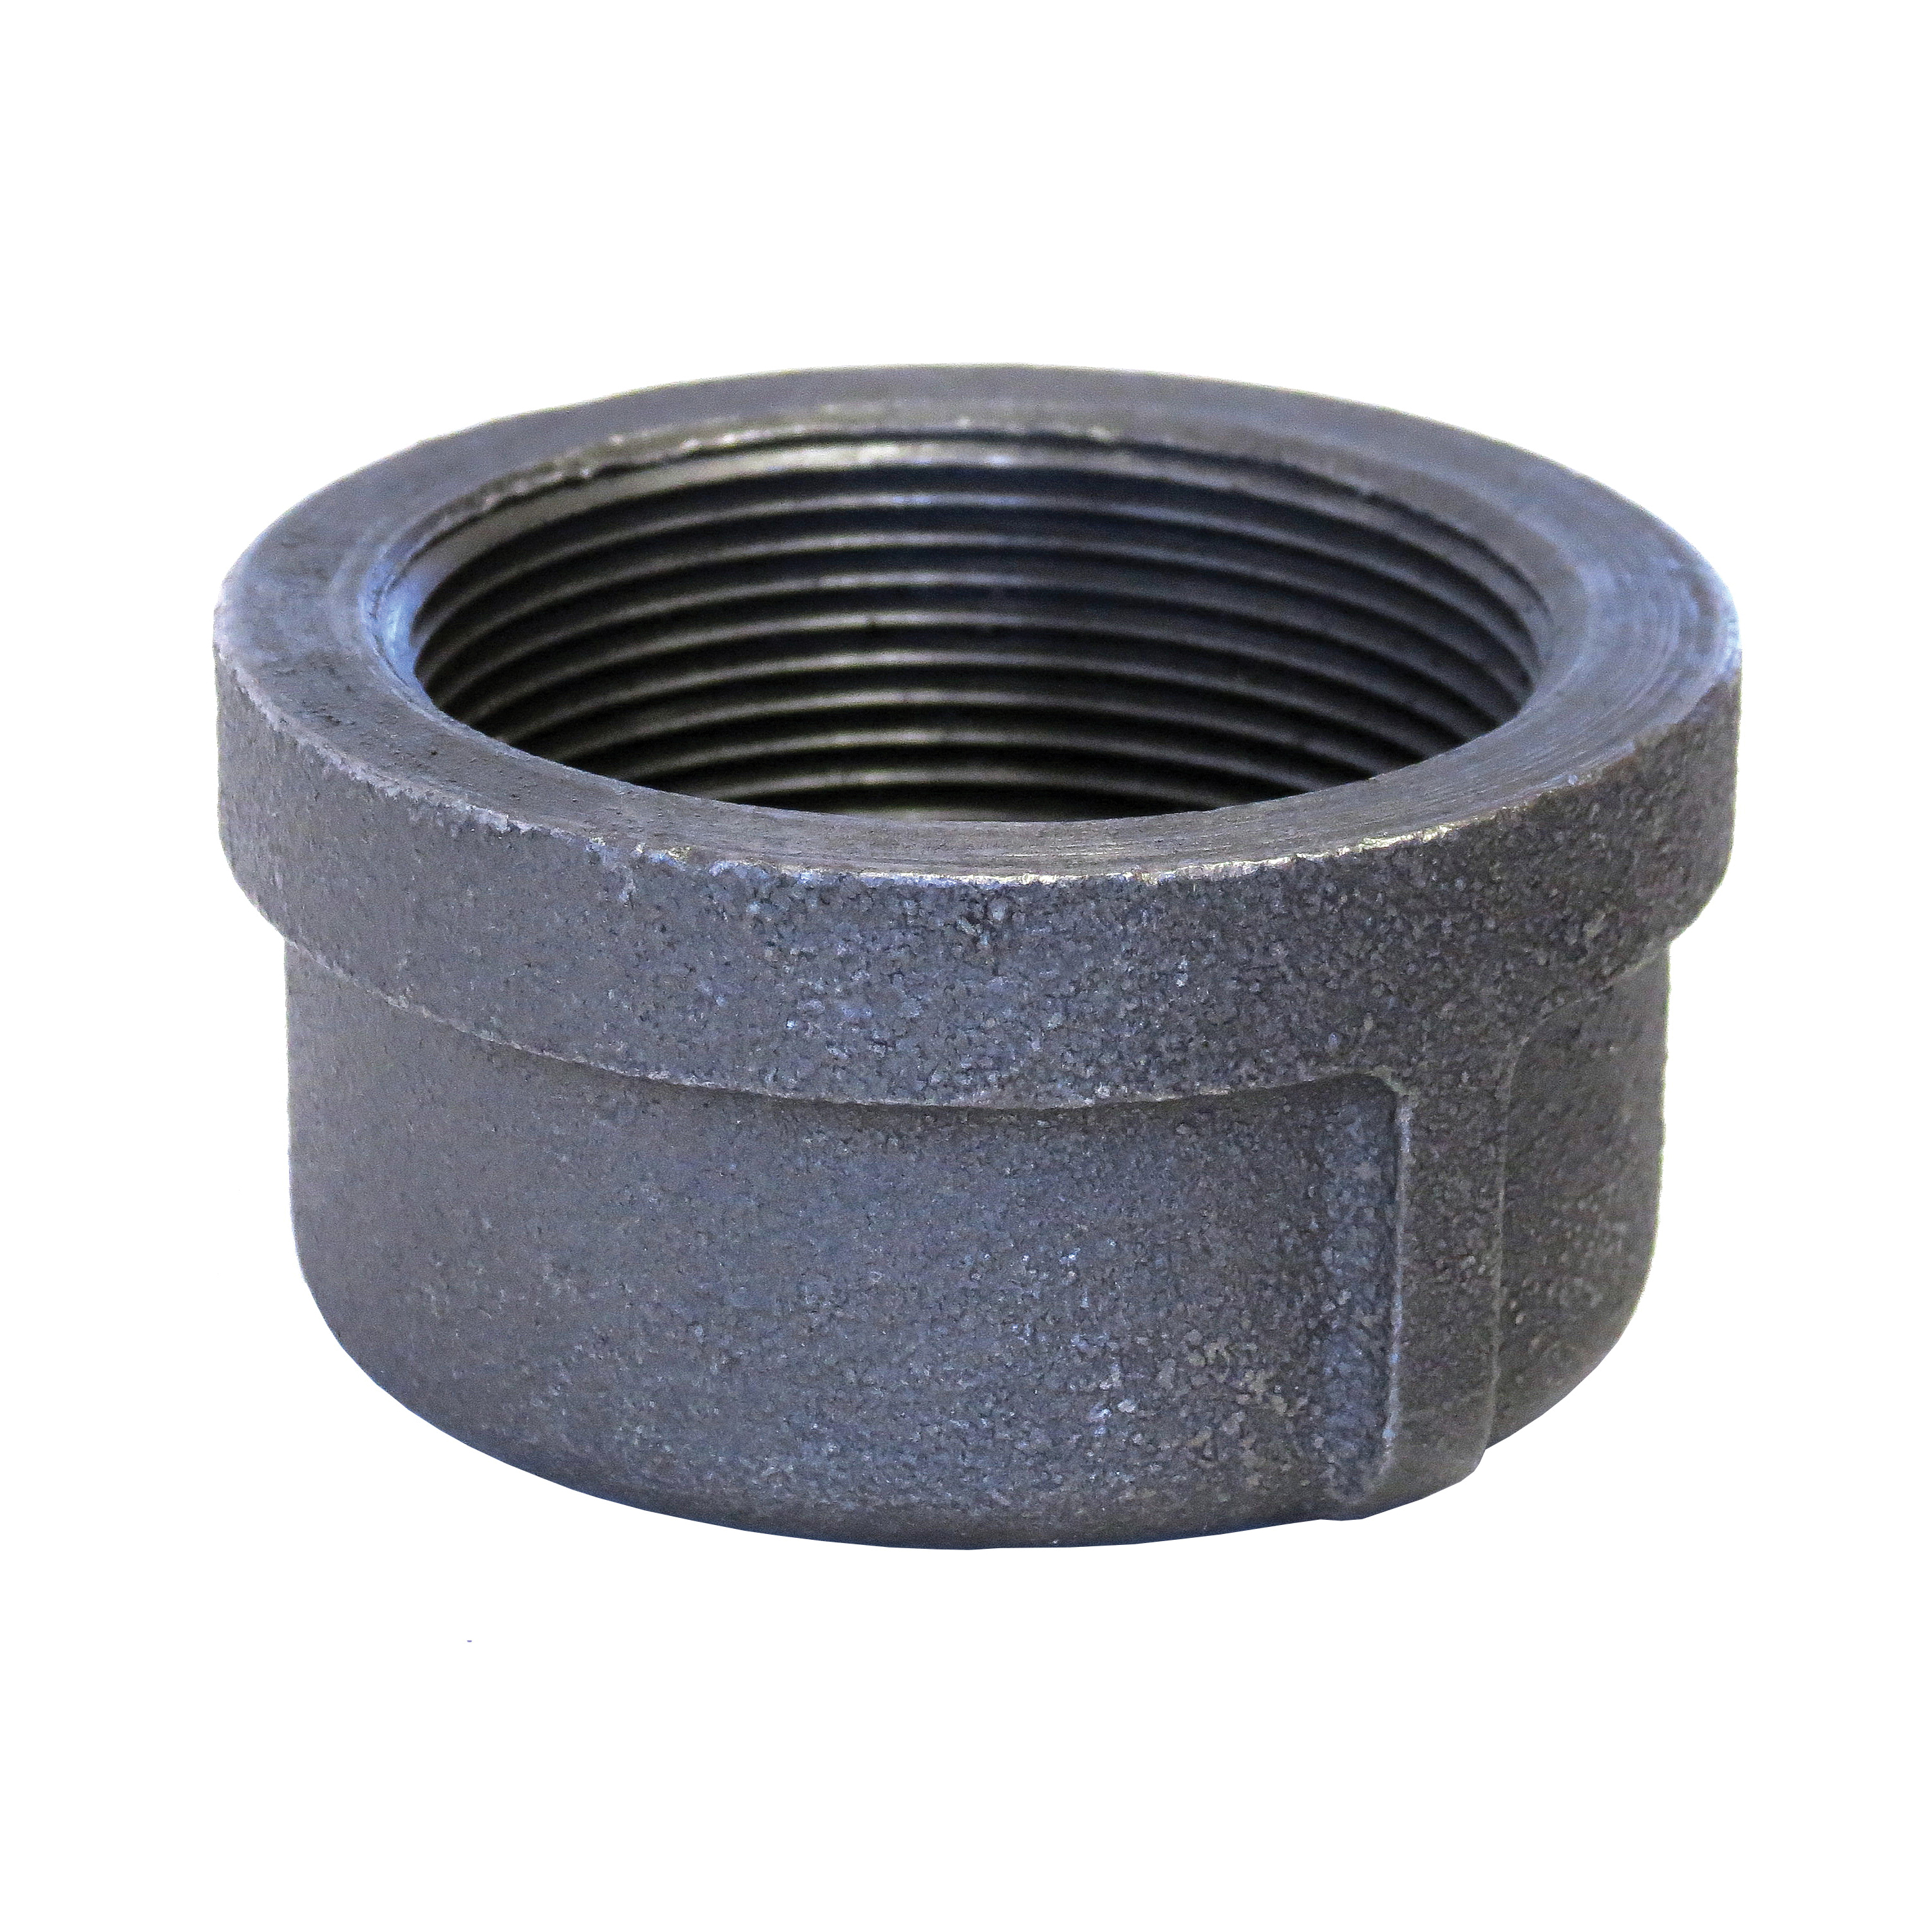 Anvil® 0319900601 FIG 1124 Standard Pipe Cap, 1 in Nominal, FNPT End Style, 150 lb, Malleable Iron, Galvanized, Domestic